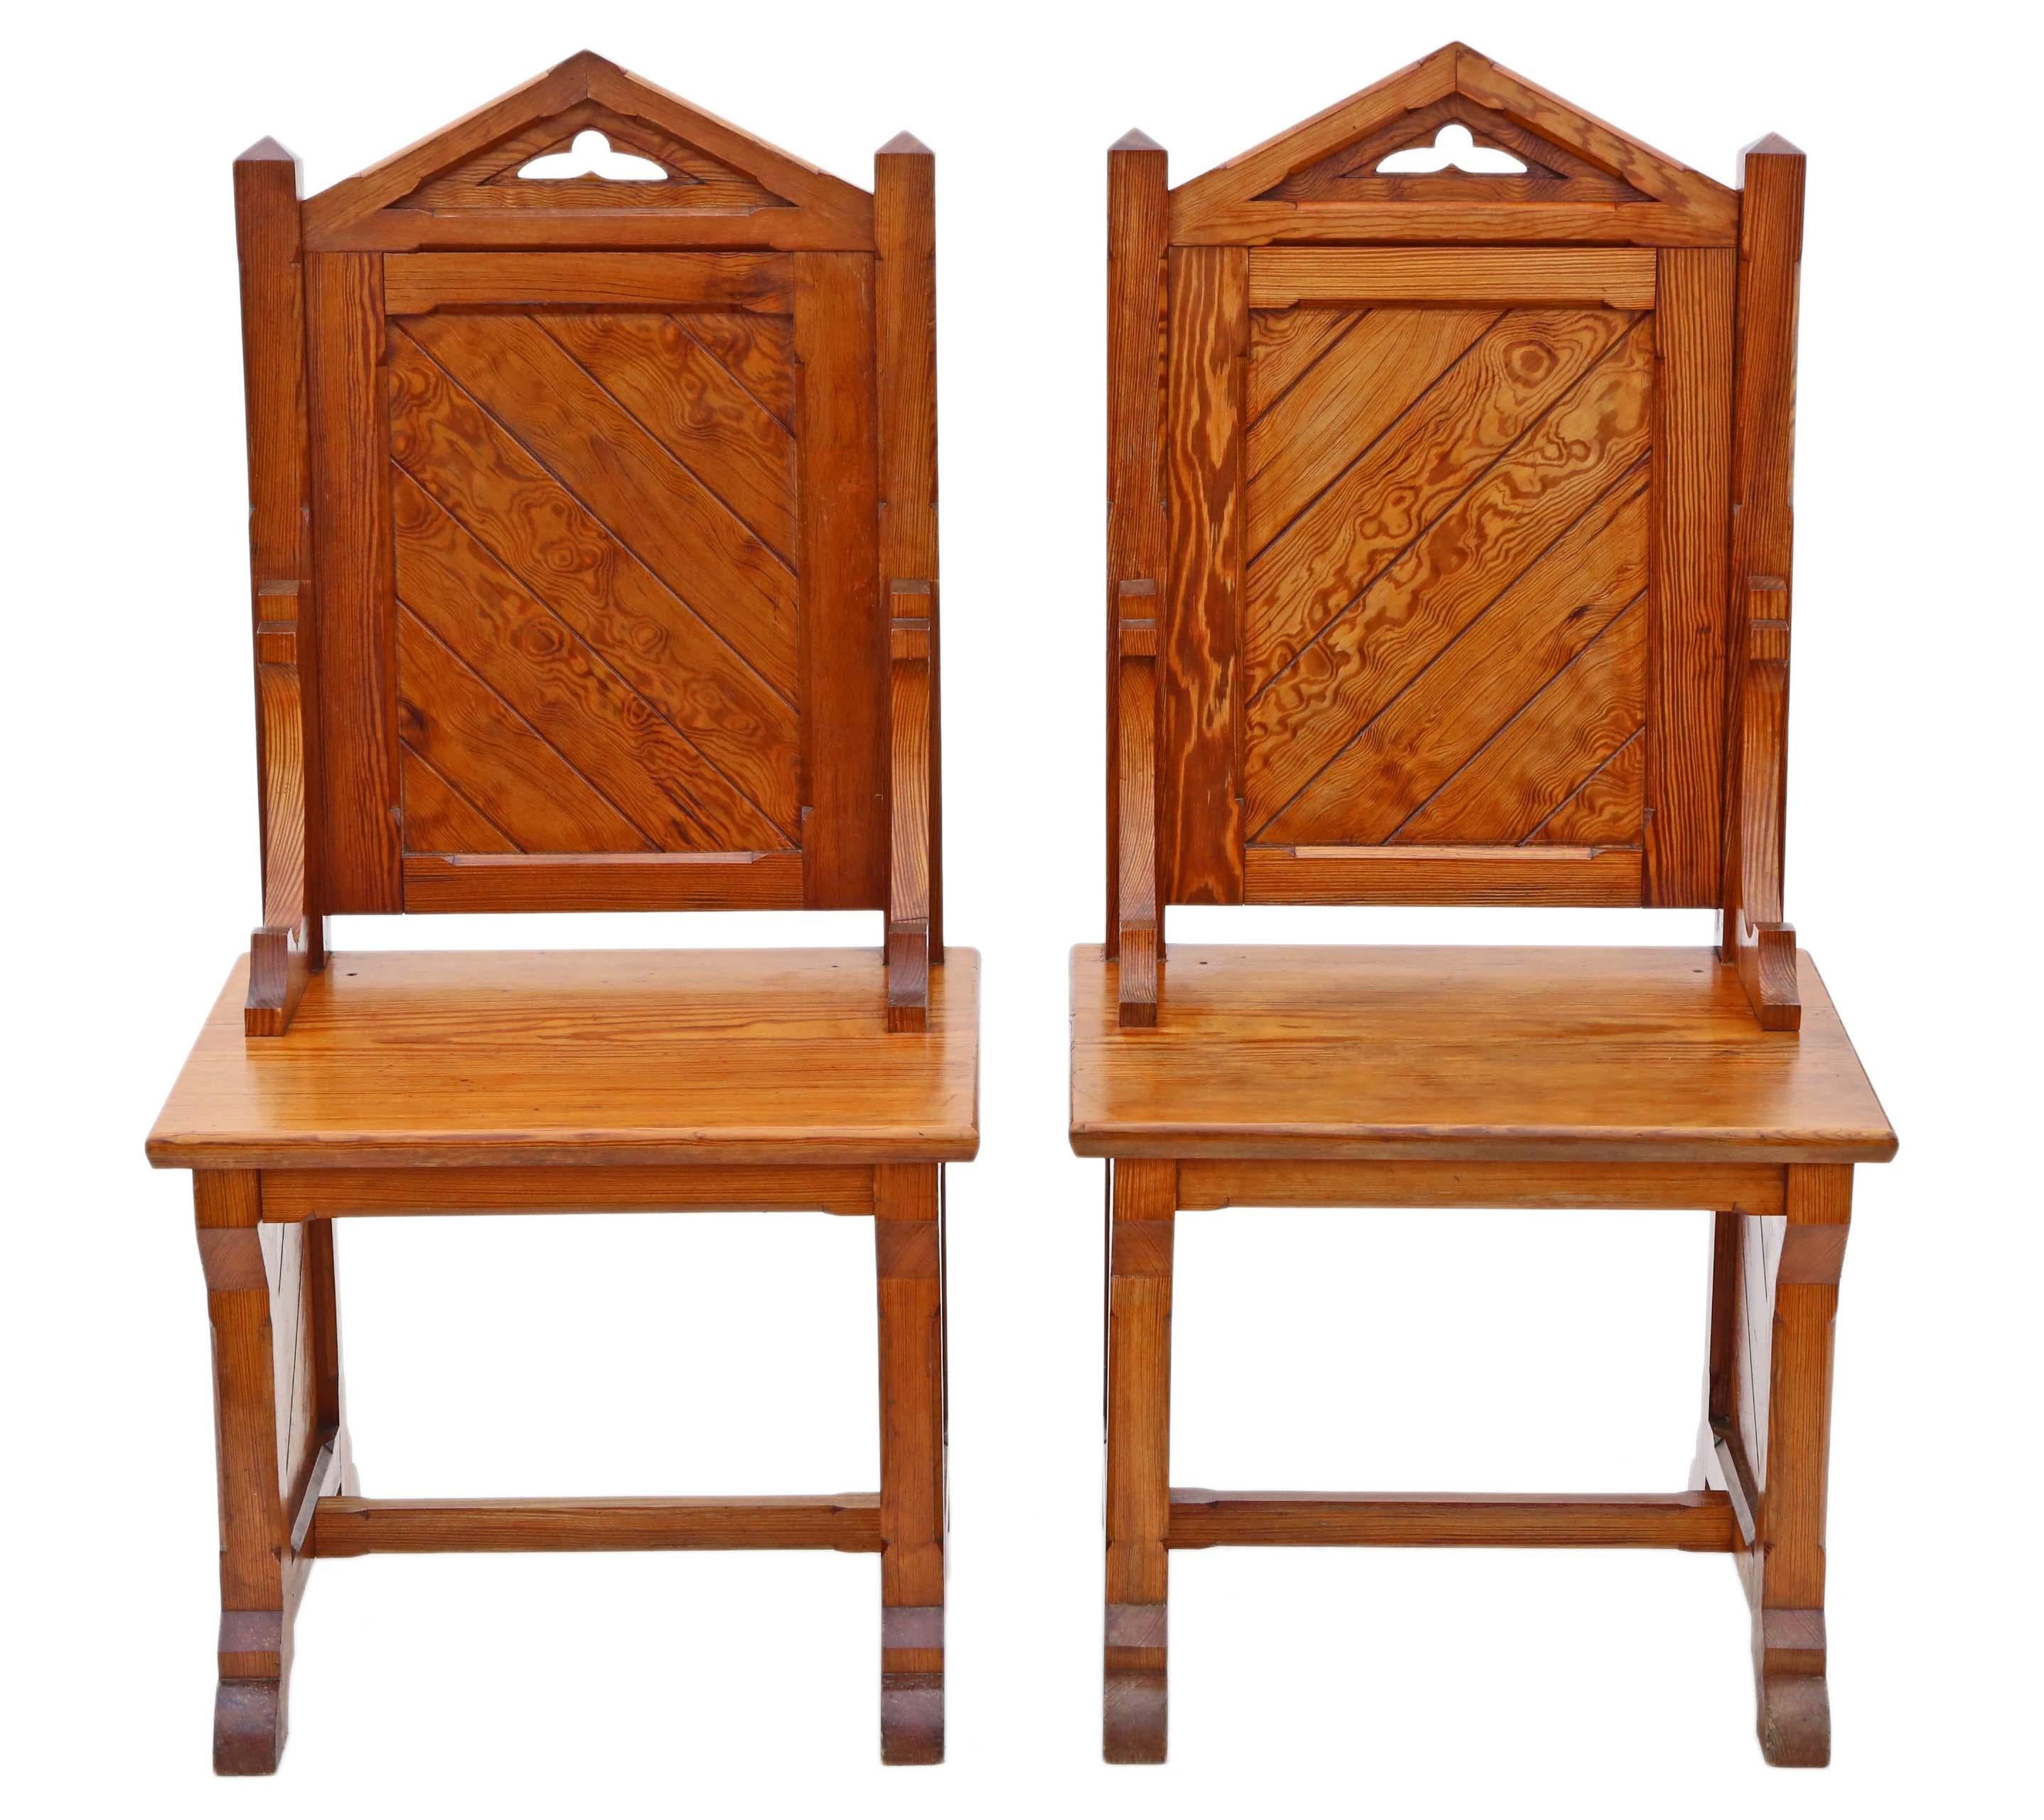 Antique Pair of Gothic Pitch Pine Throne Side Hall Bedroom Chairs In Good Condition For Sale In Wisbech, Cambridgeshire